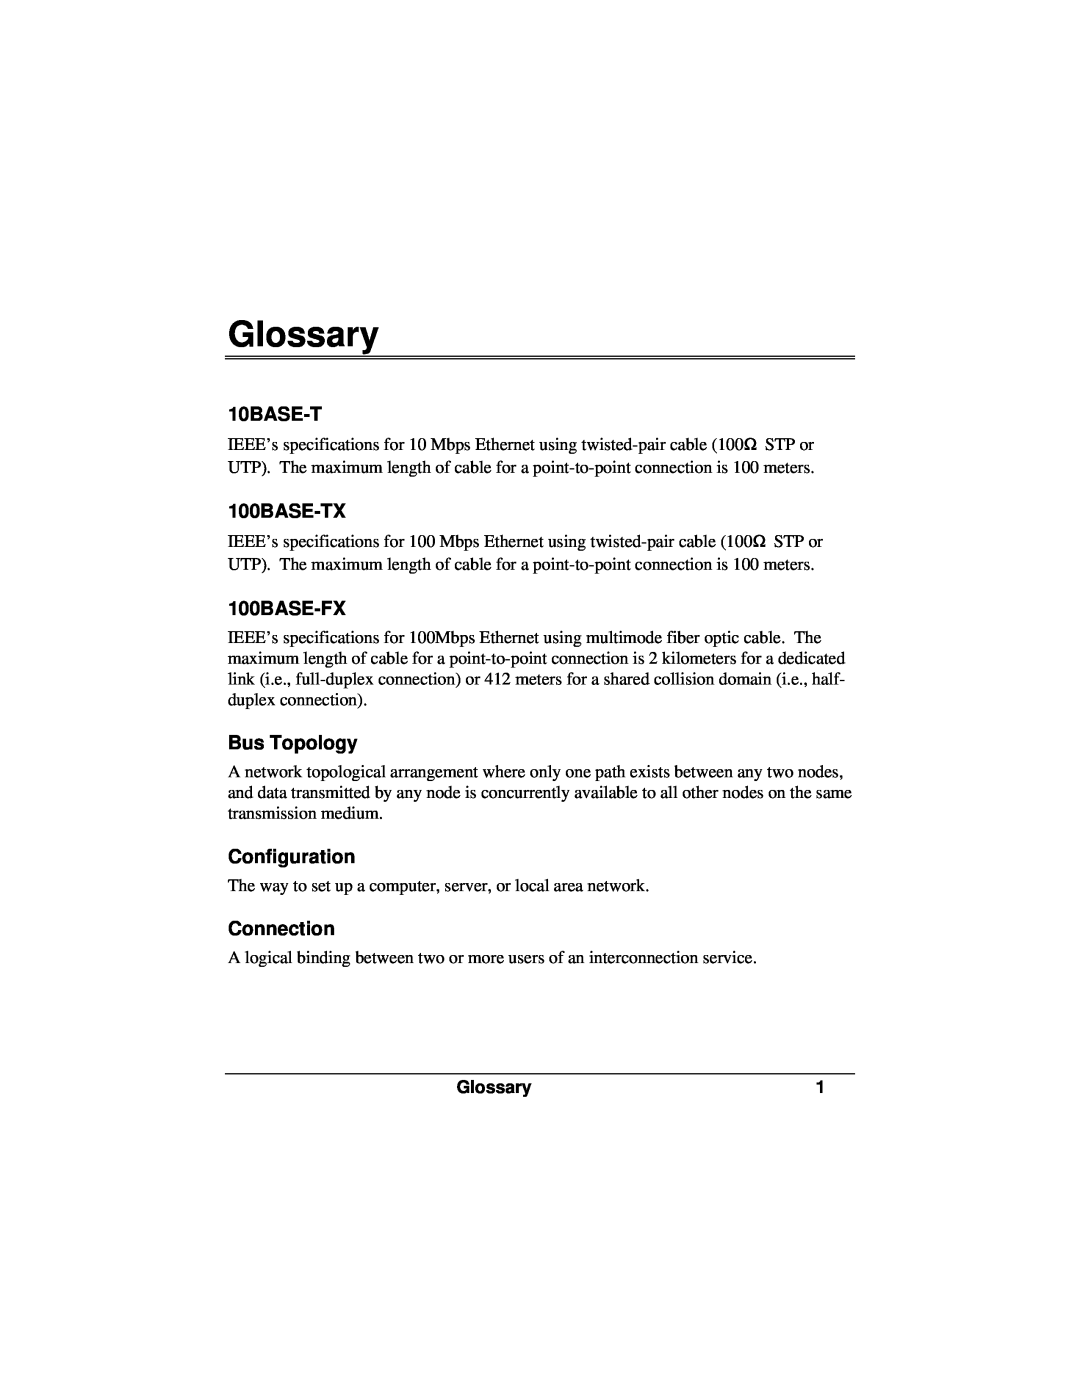 Accton Technology ES3002-TF manual Glossary, 10BASE-T, 100BASE-TX, 100BASE-FX, Bus Topology, Configuration, Connection 